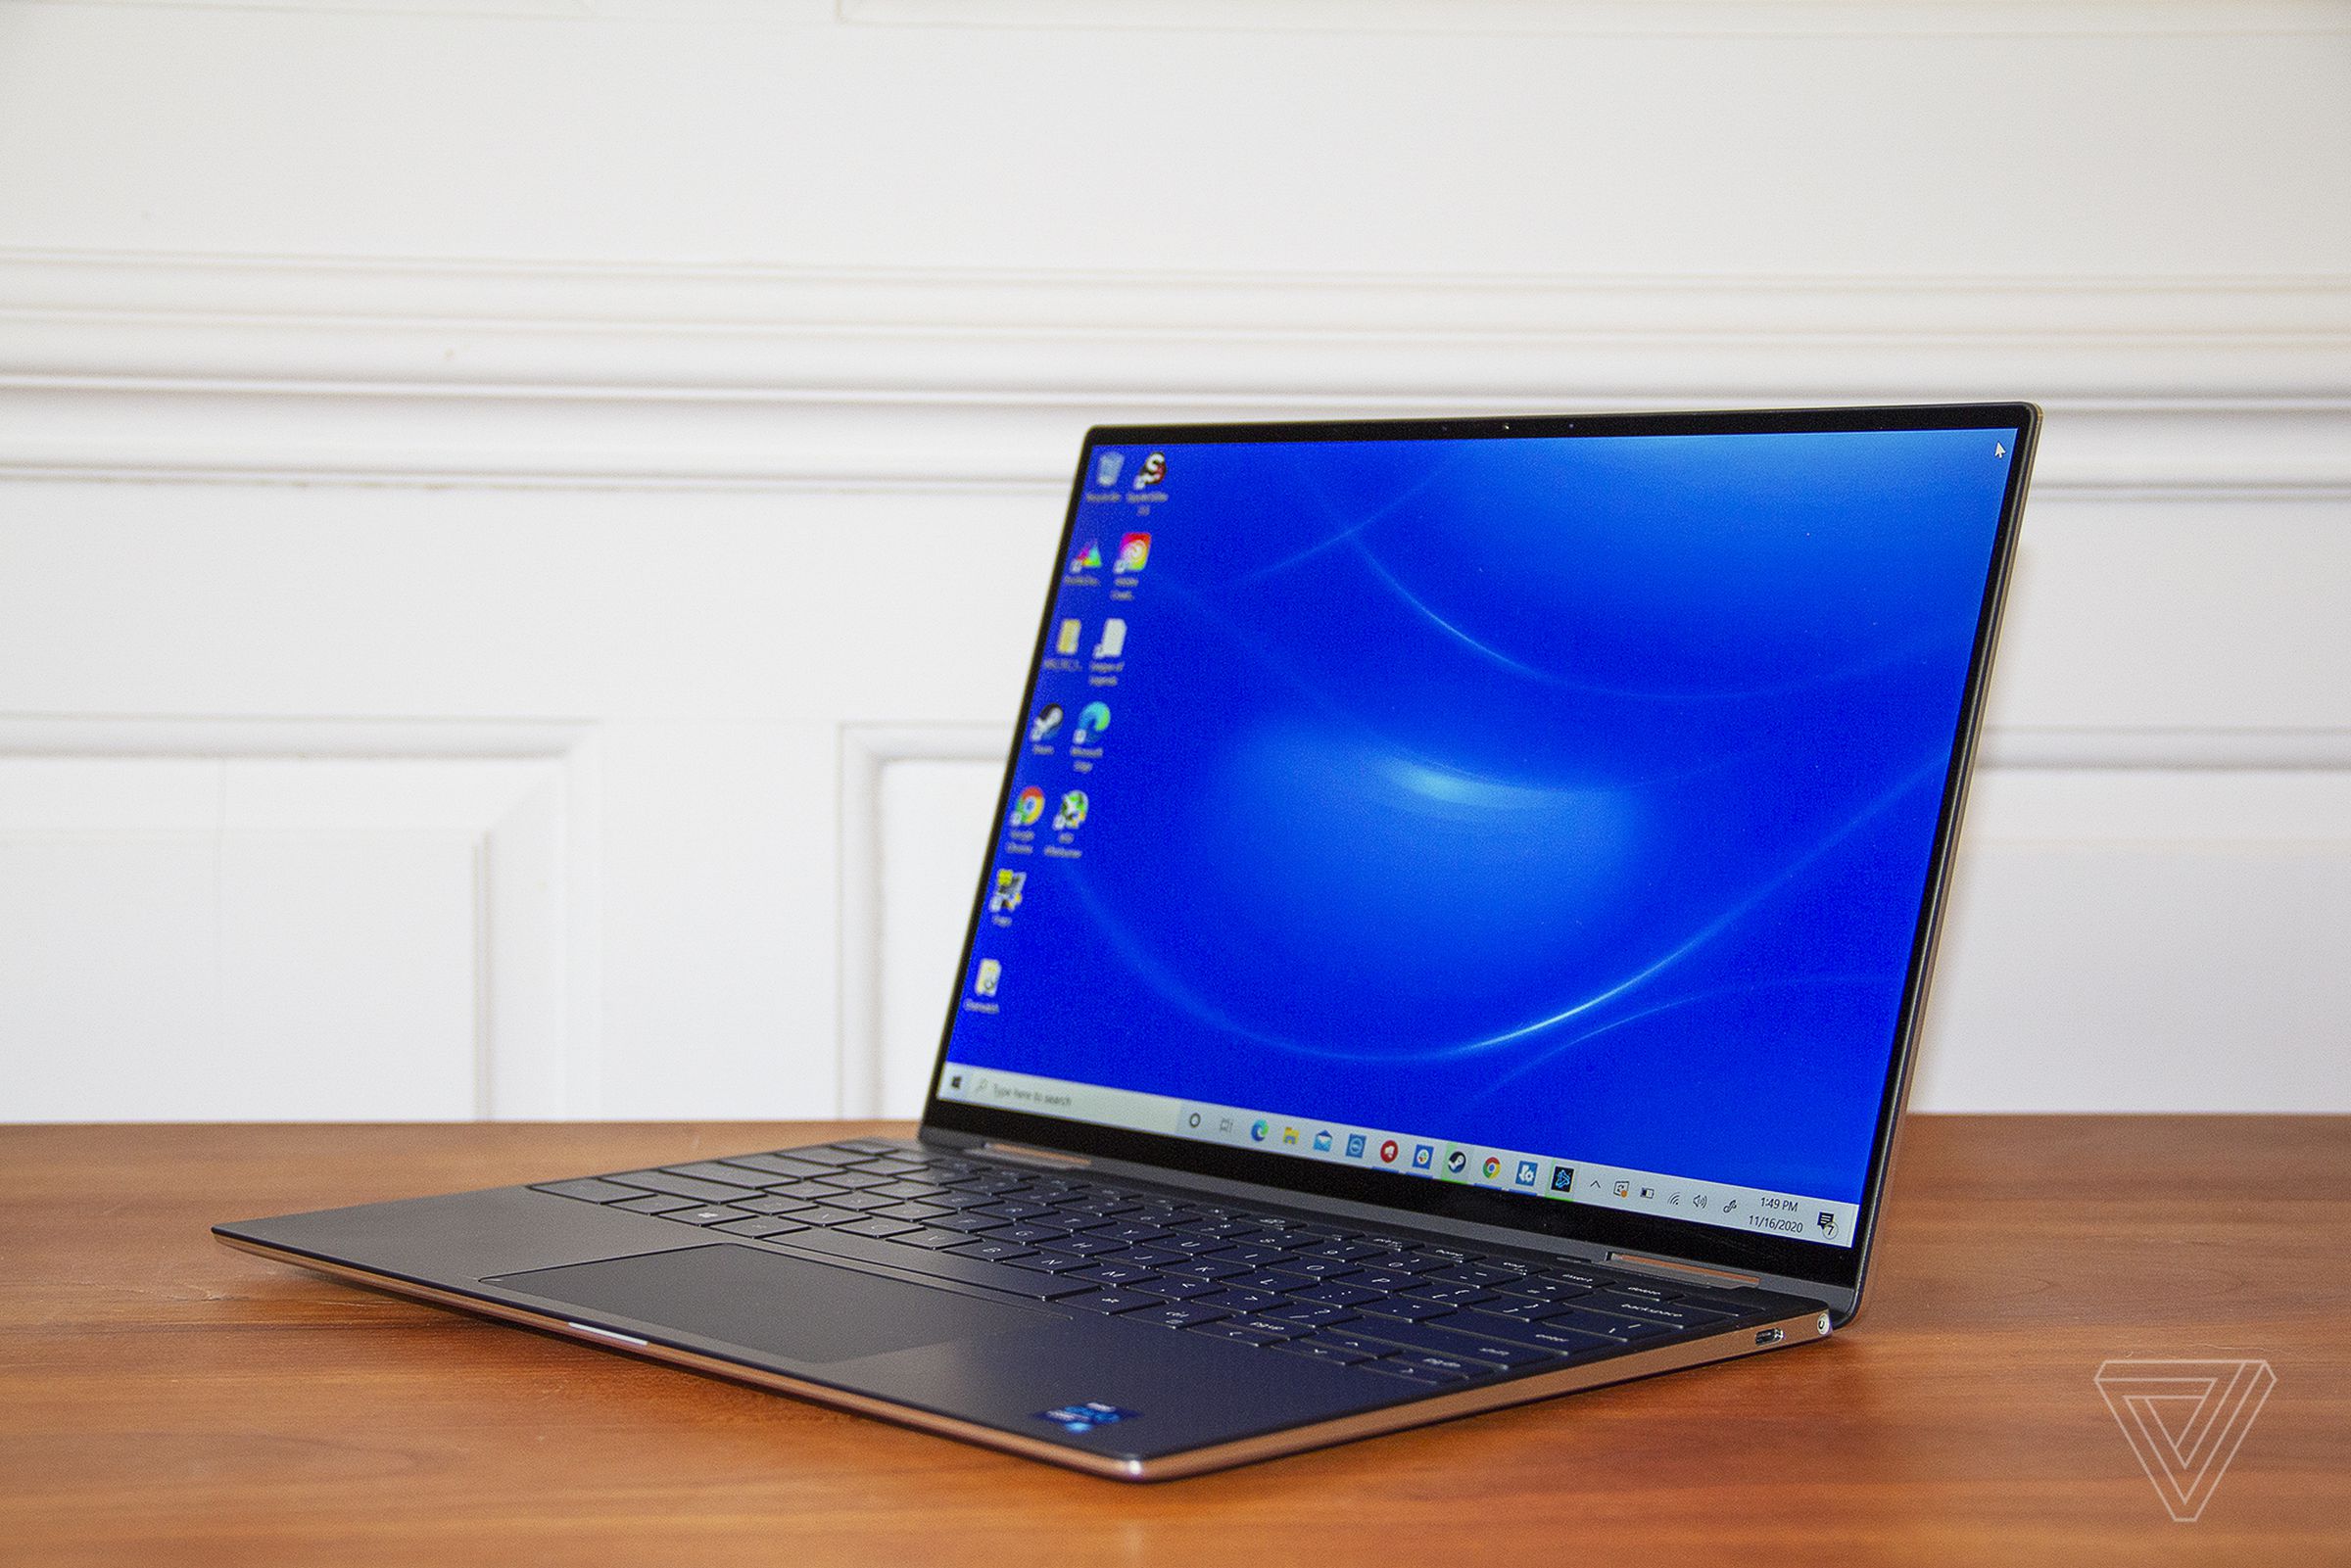 The Dell XPS 13 2-in-1 angled to the right.